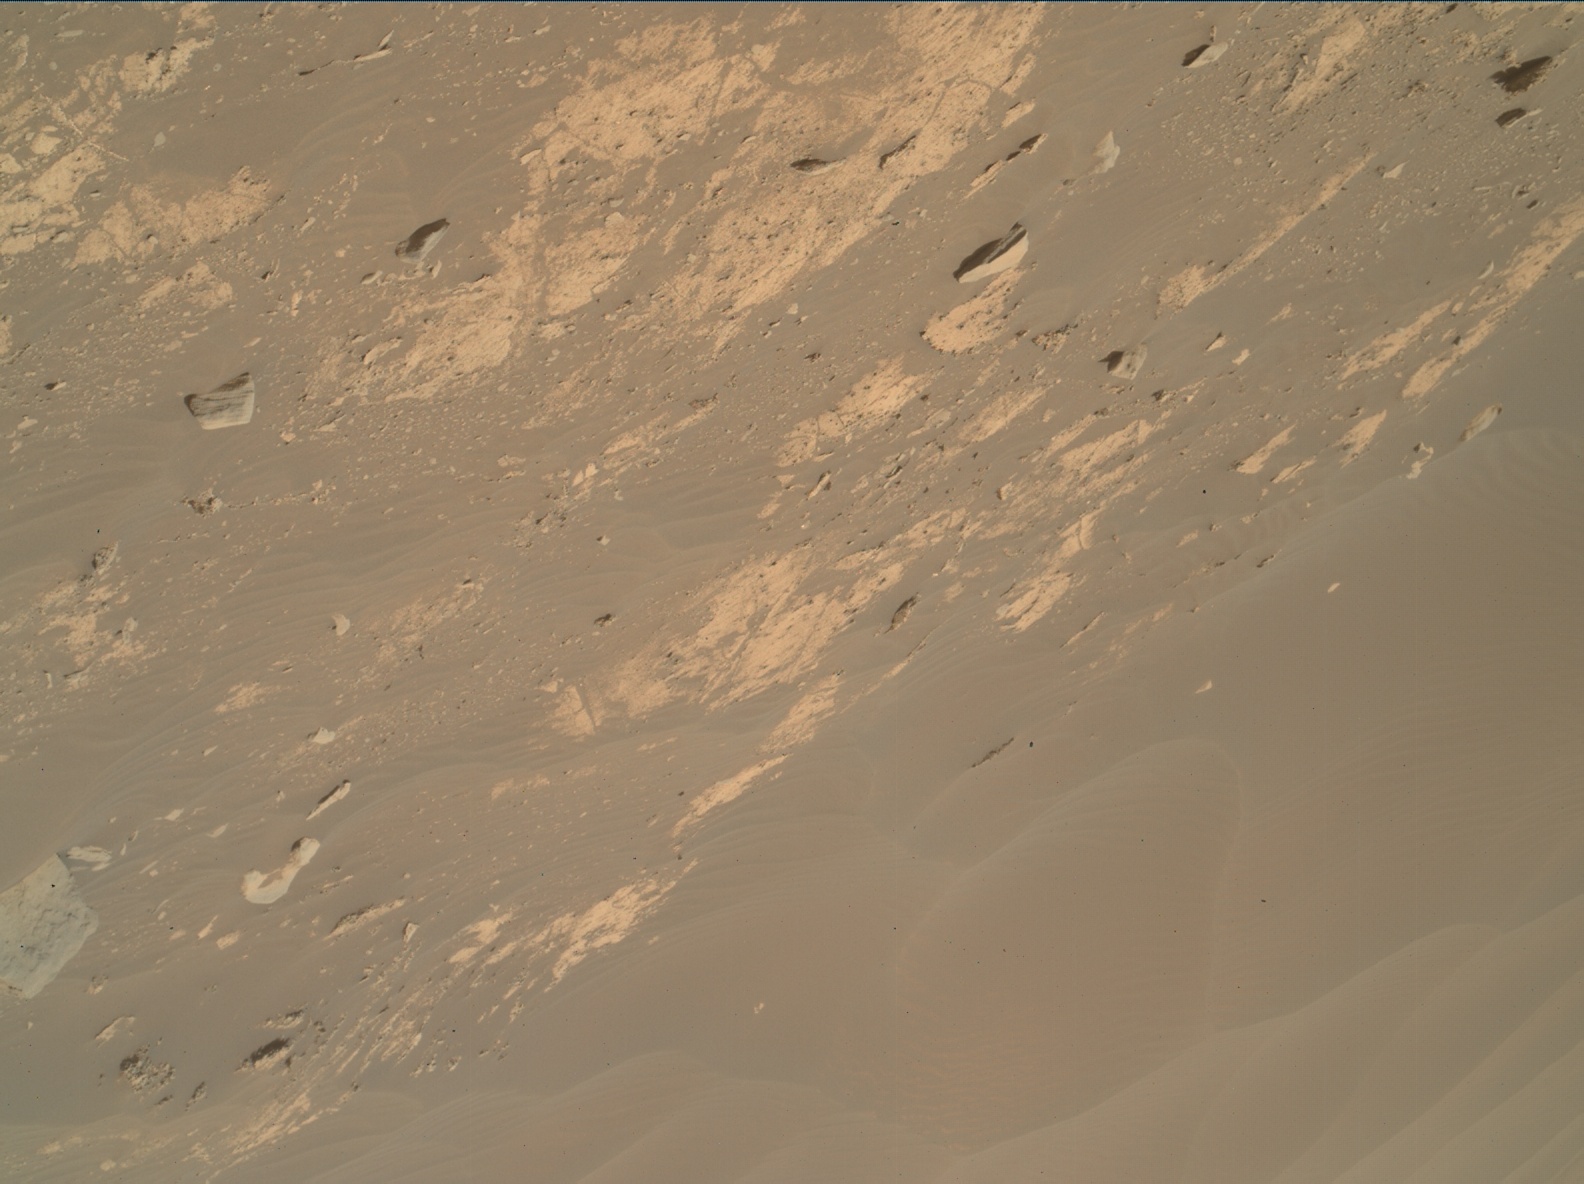 Nasa's Mars rover Curiosity acquired this image using its Mars Hand Lens Imager (MAHLI) on Sol 2687